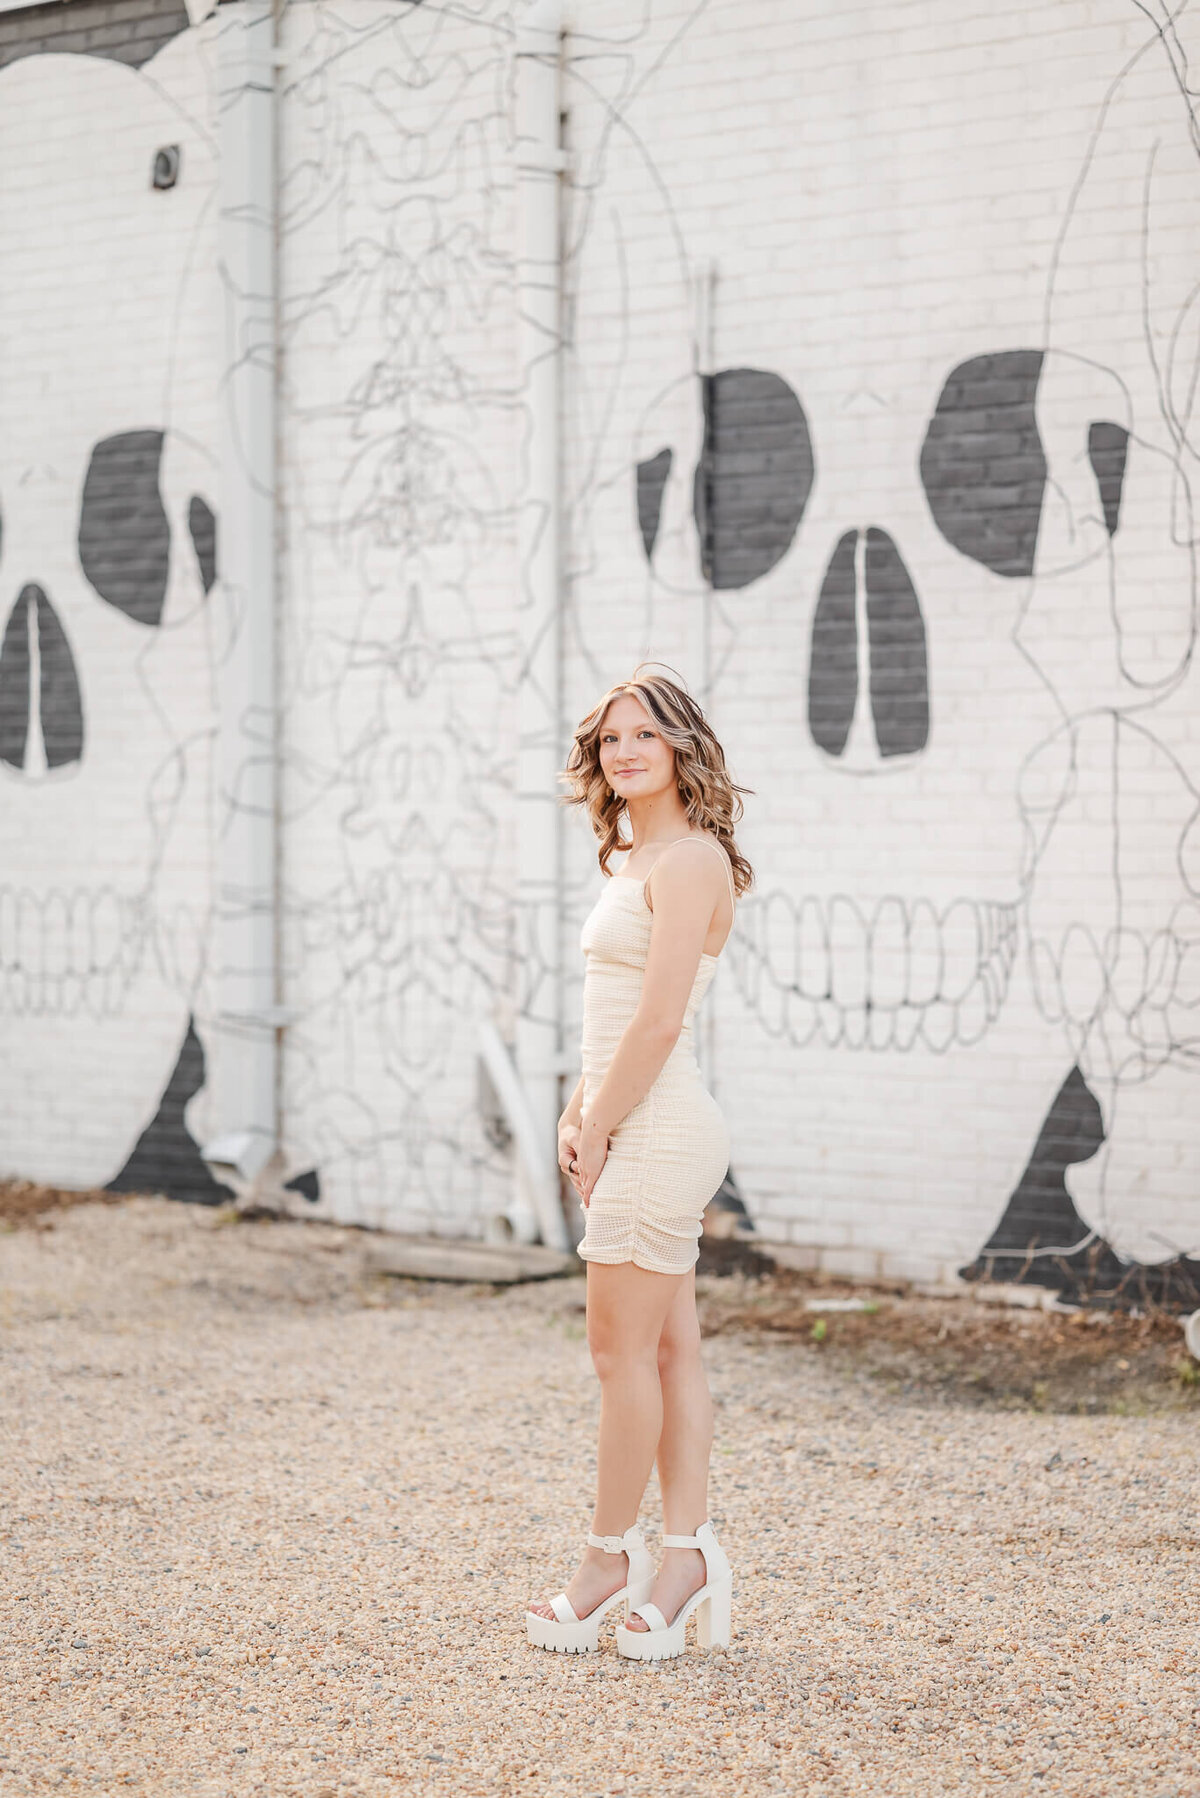 A high school senior, wearing an off-white bodycon dress and shoes, looks over her should. She is standing in front of a brick wall painted with a skull mural.